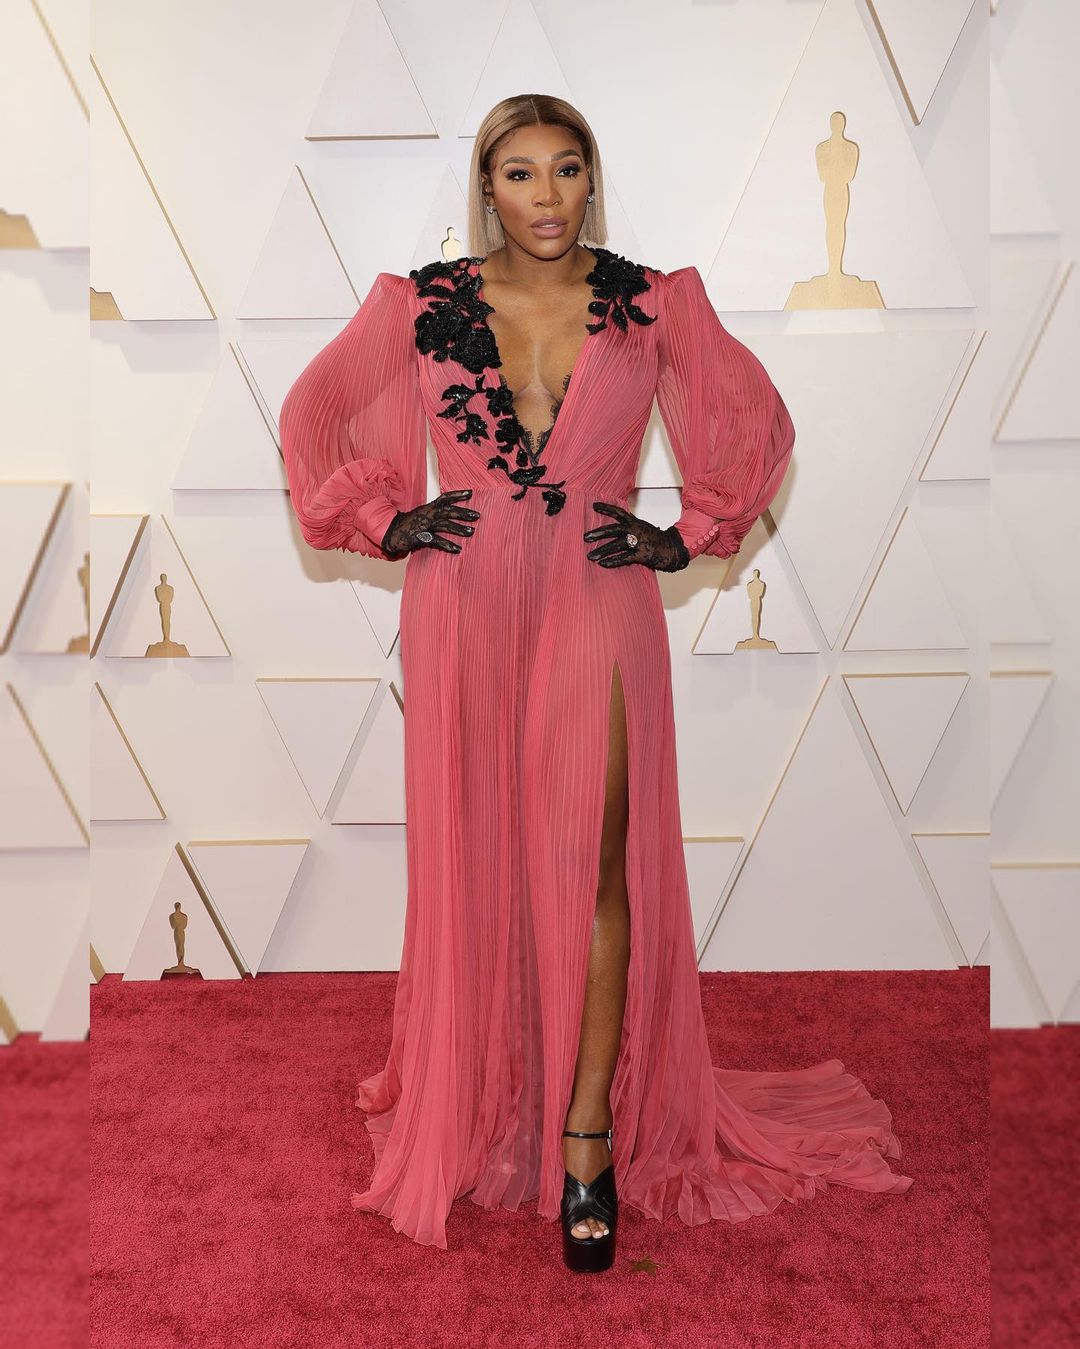 Serena Williams pulls all stops in the pleated pink dress by Gucci